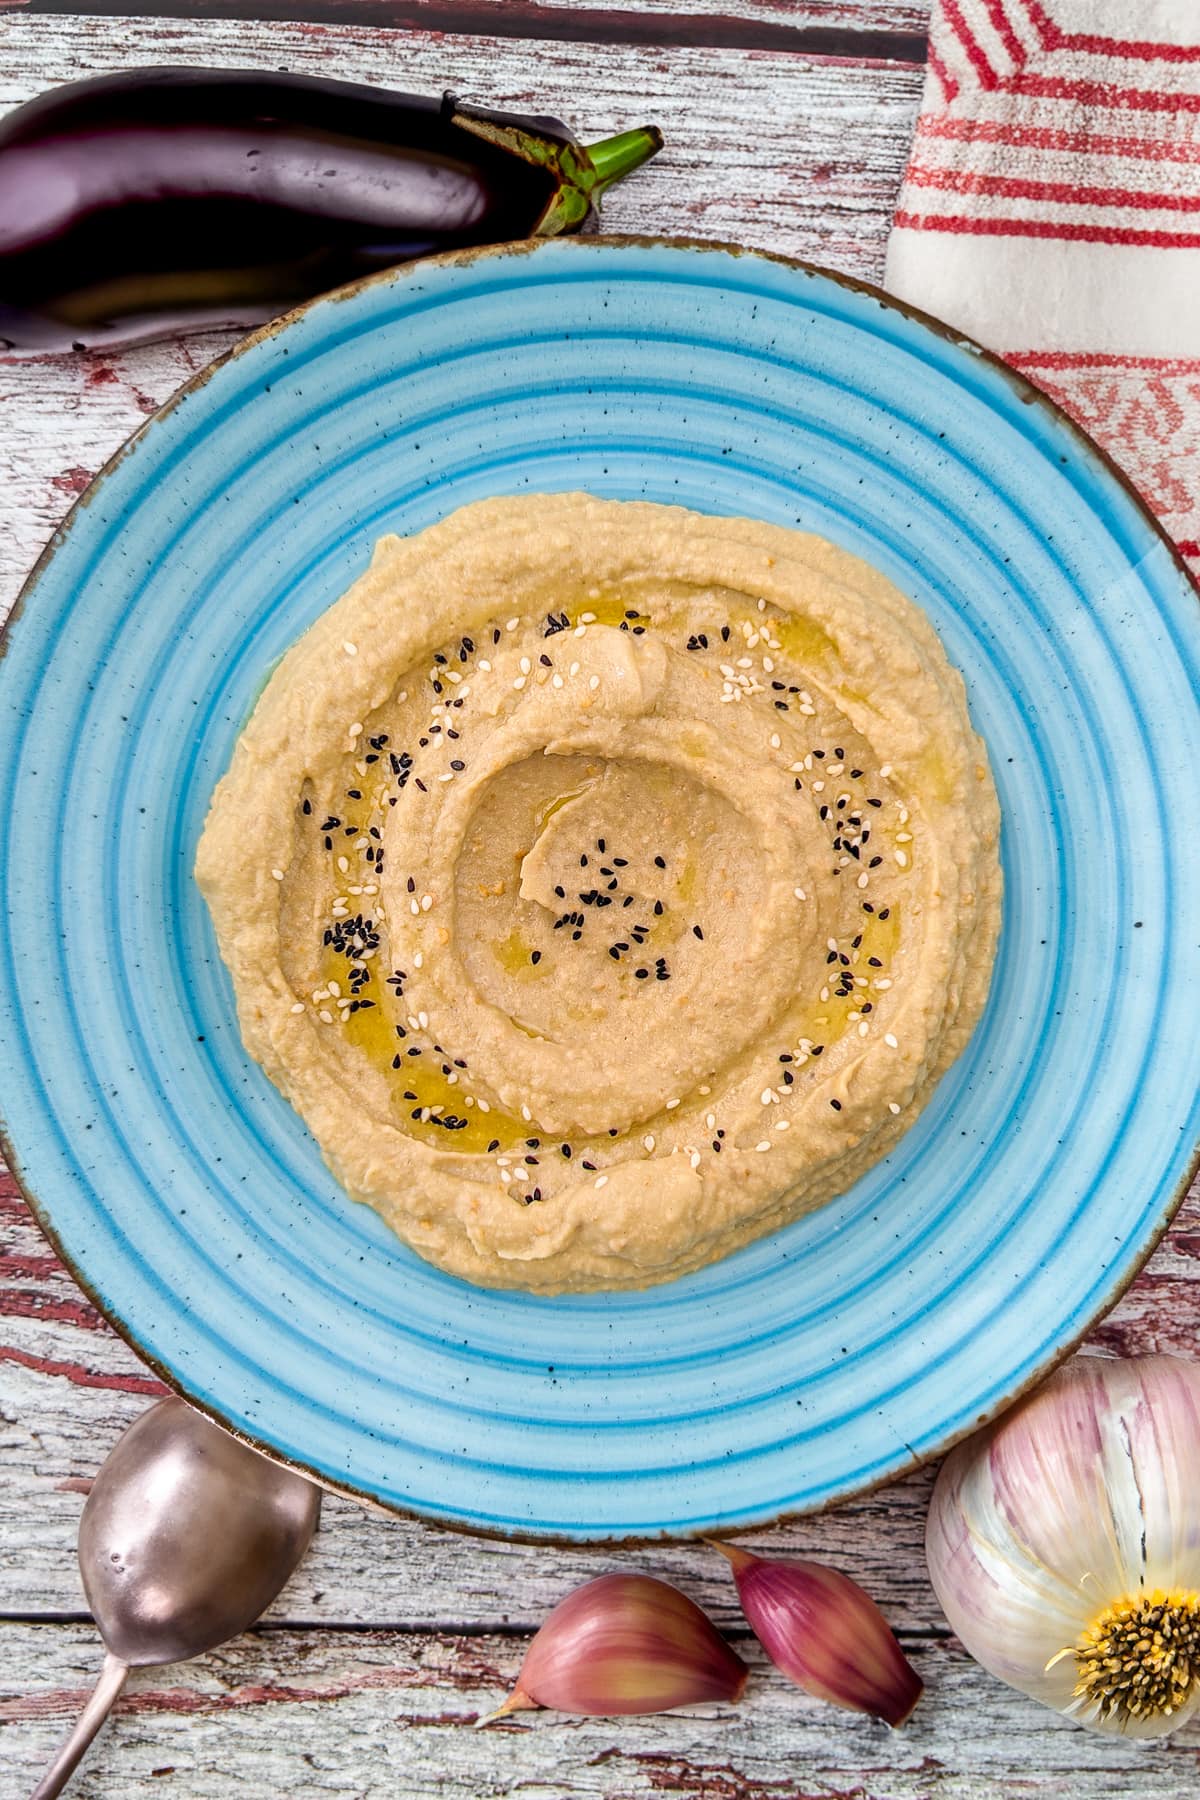 Top view of eggplant dip with tahini in a vintage blue plate.